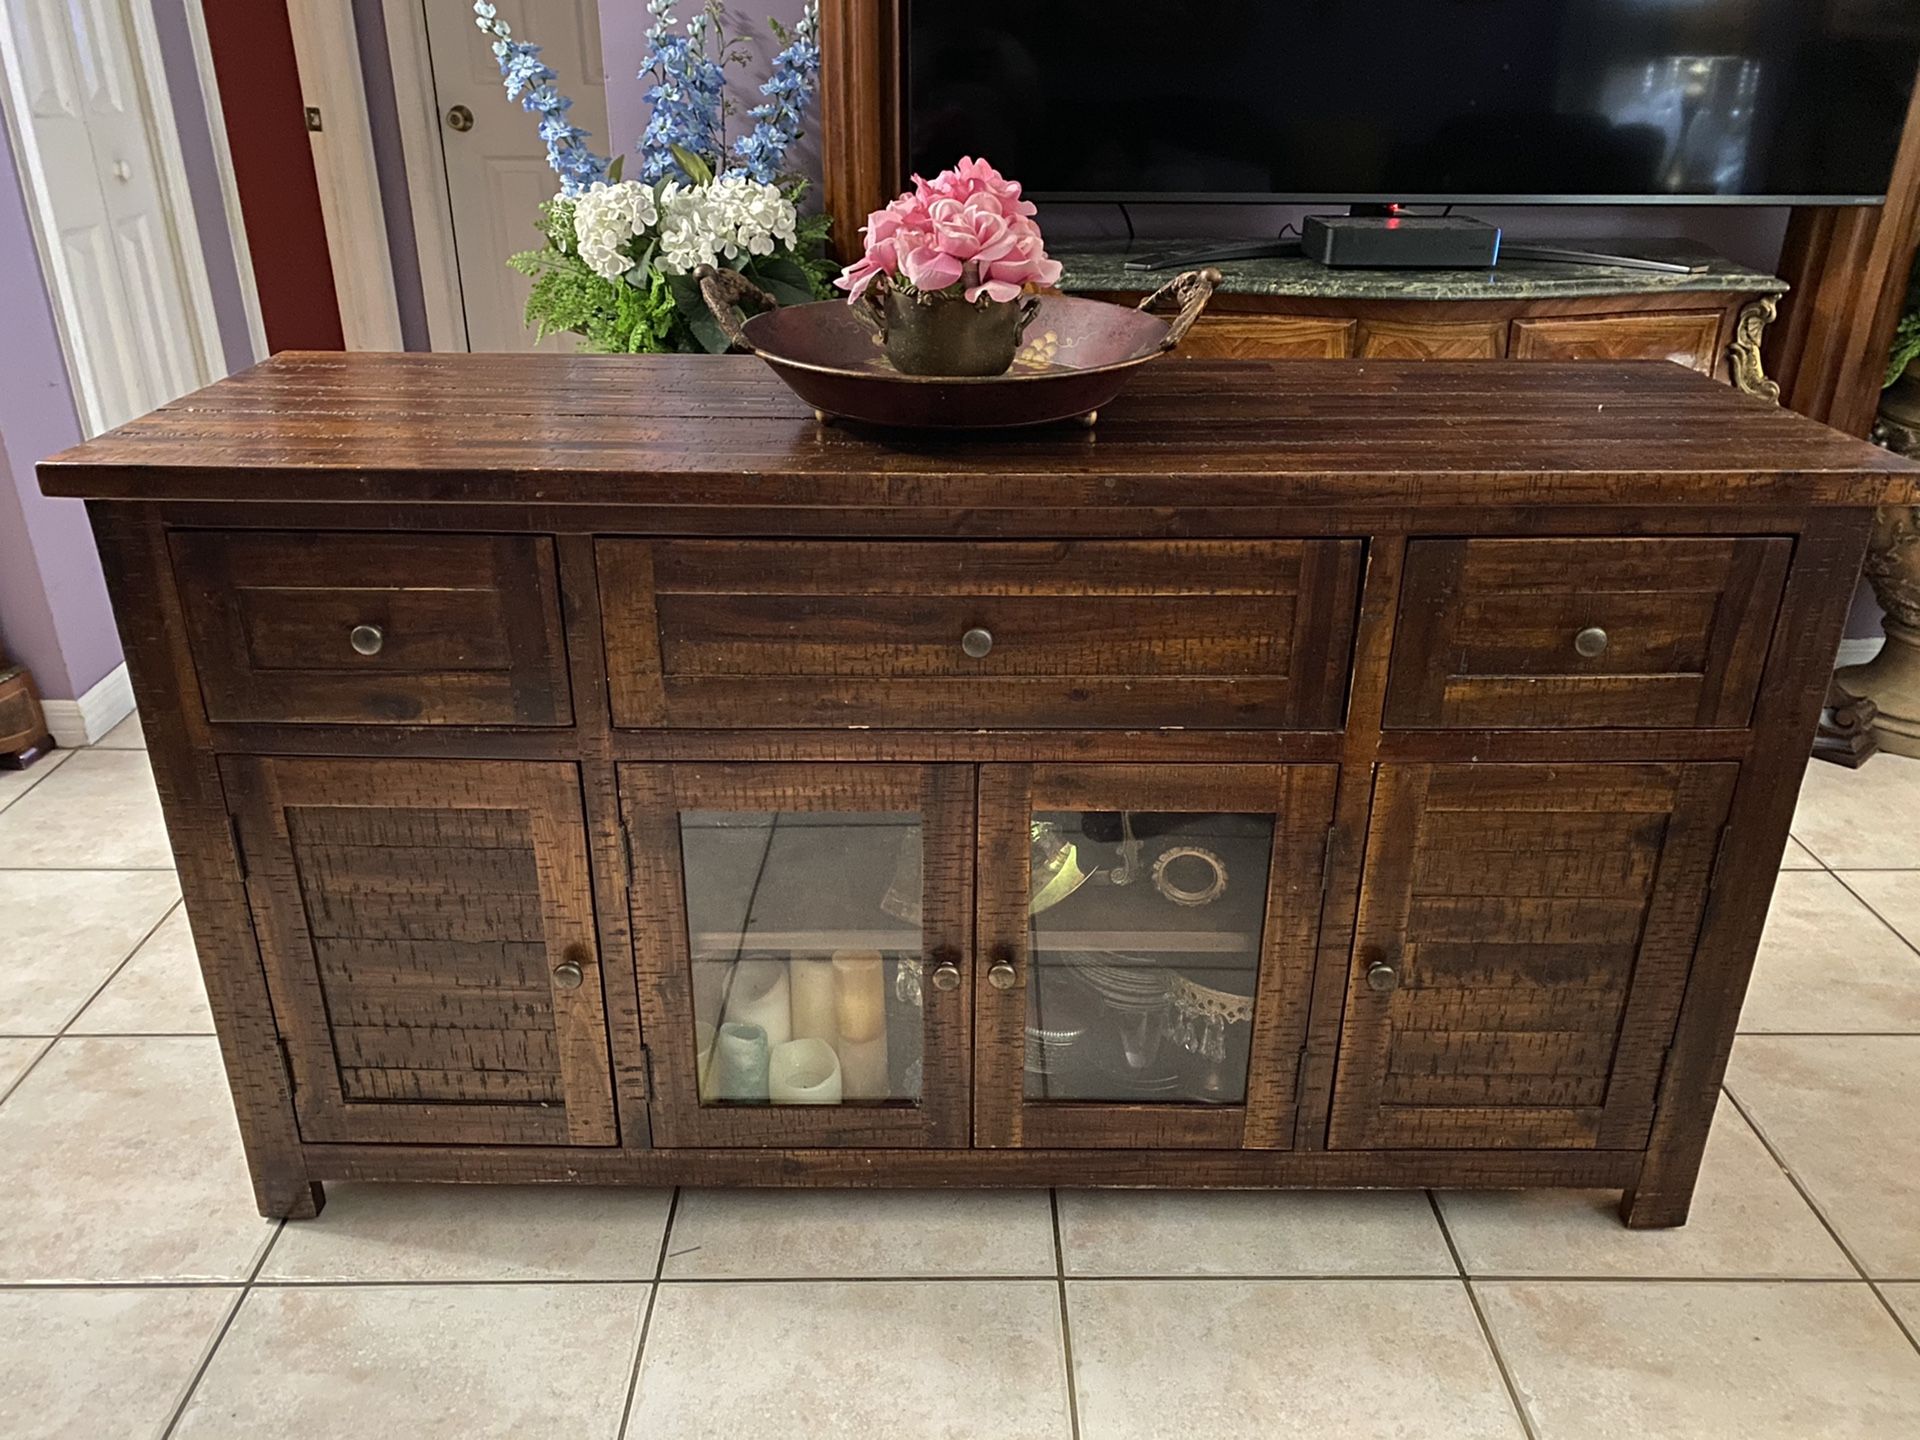 WOOD ENTRY FOYER MEDIA UNIT CONSOLE BUFFET TV STAND TABLE